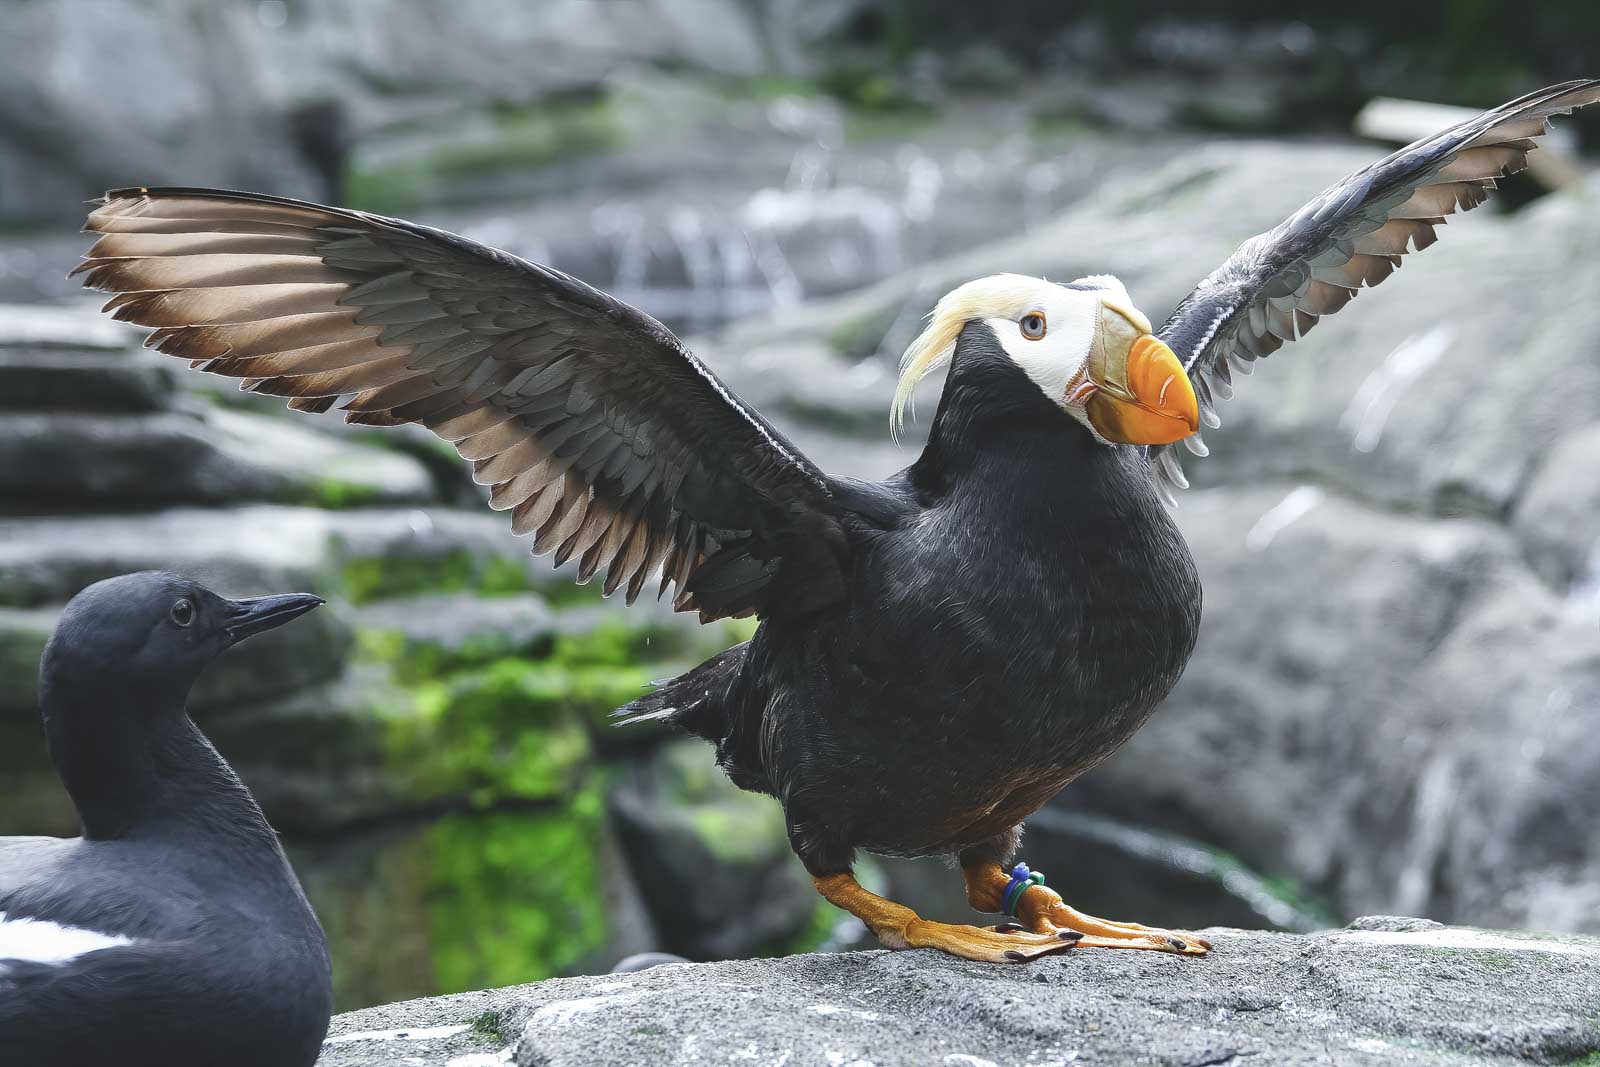 Tufted puffin with its wings spread perched on a rock.